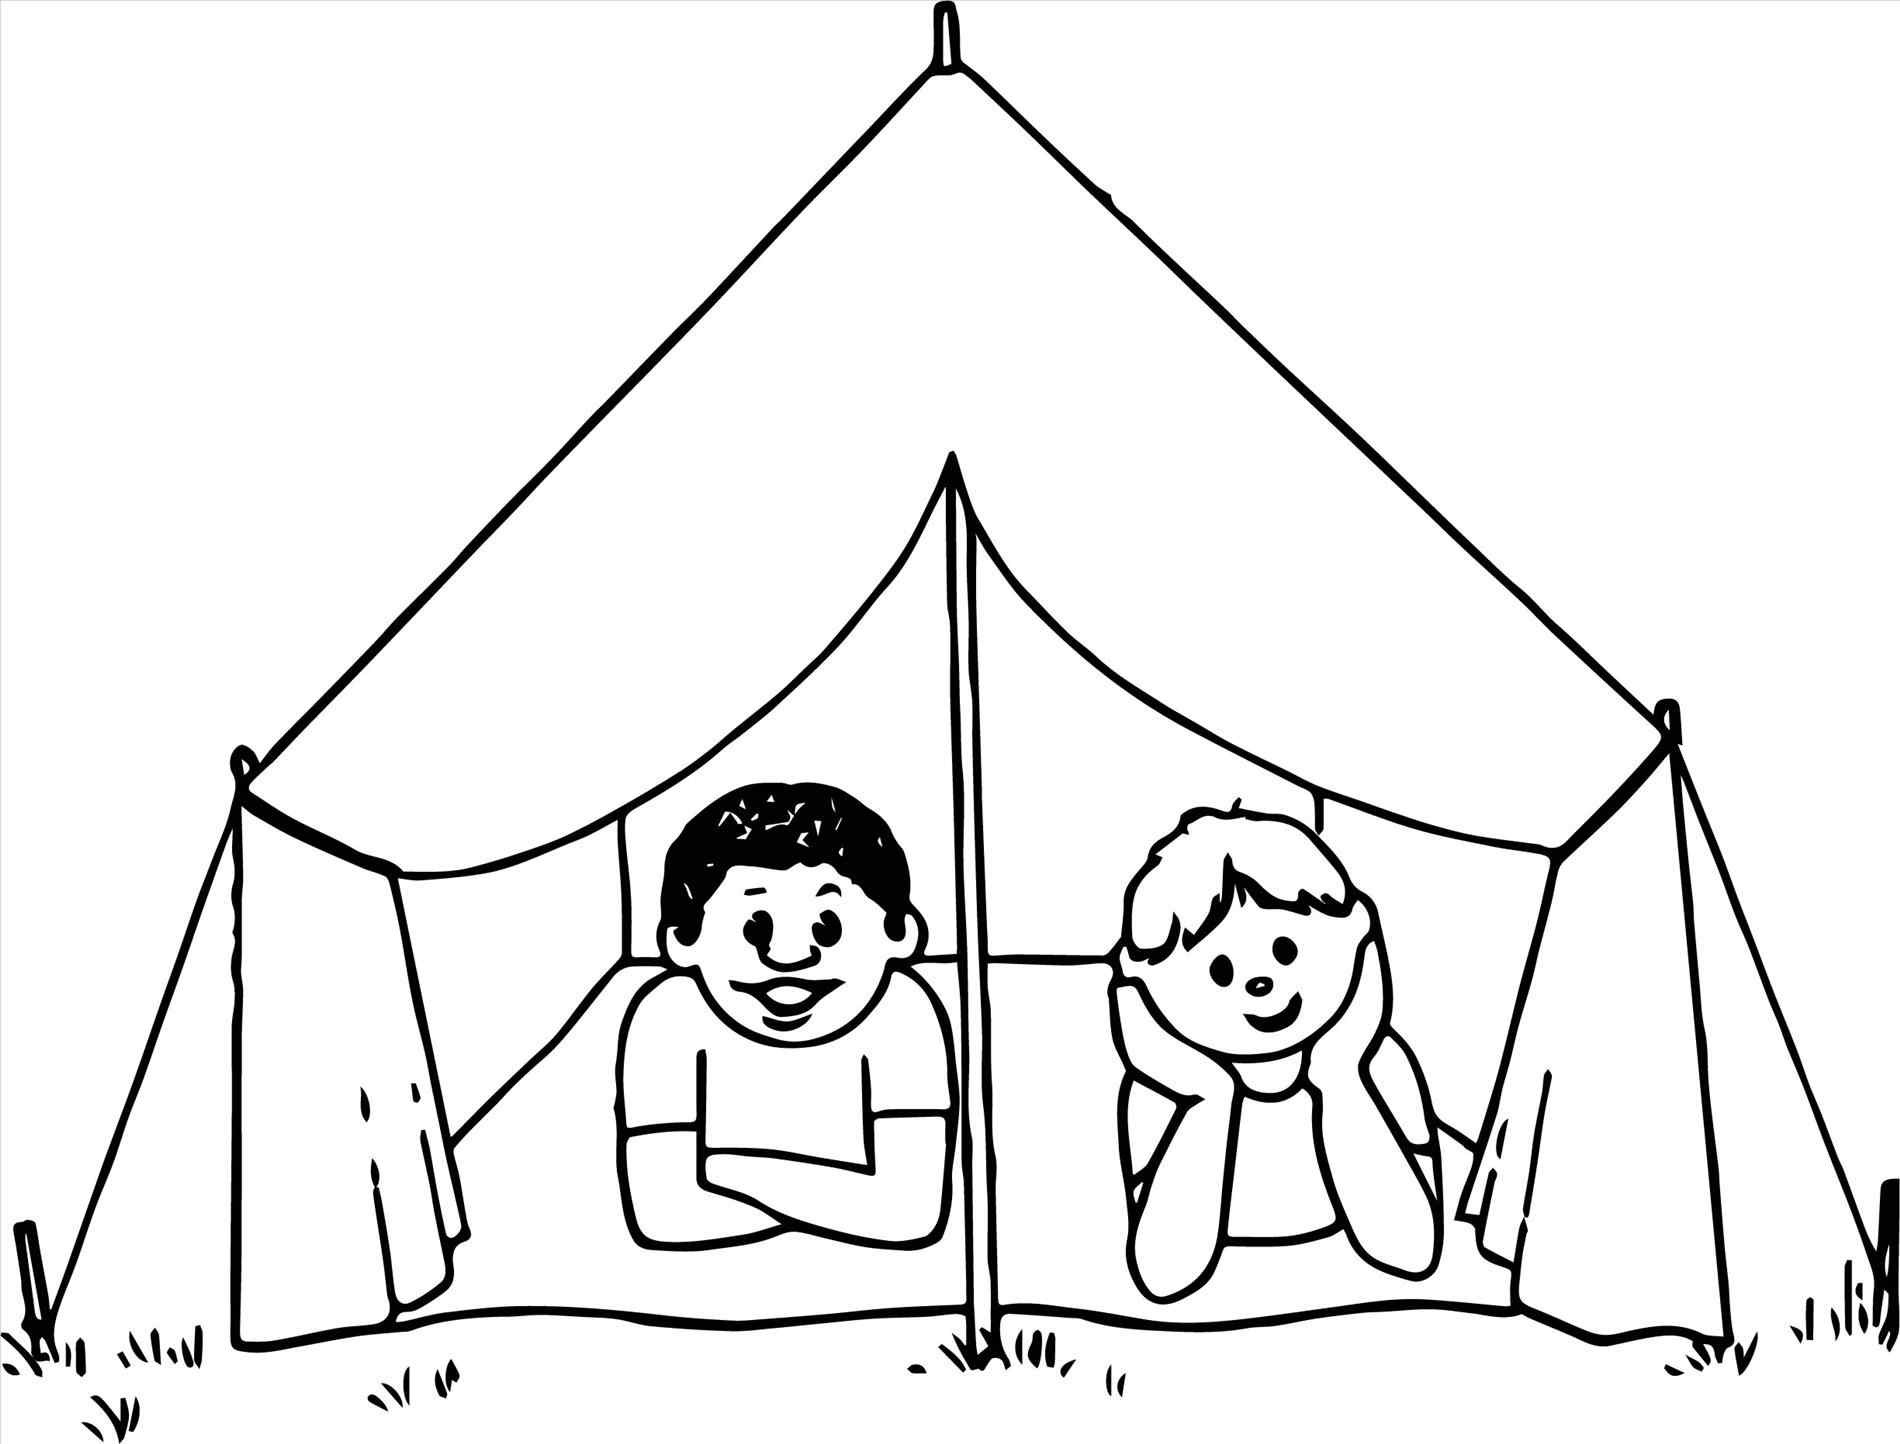 Tent Coloring Page at GetColorings com Free printable colorings pages